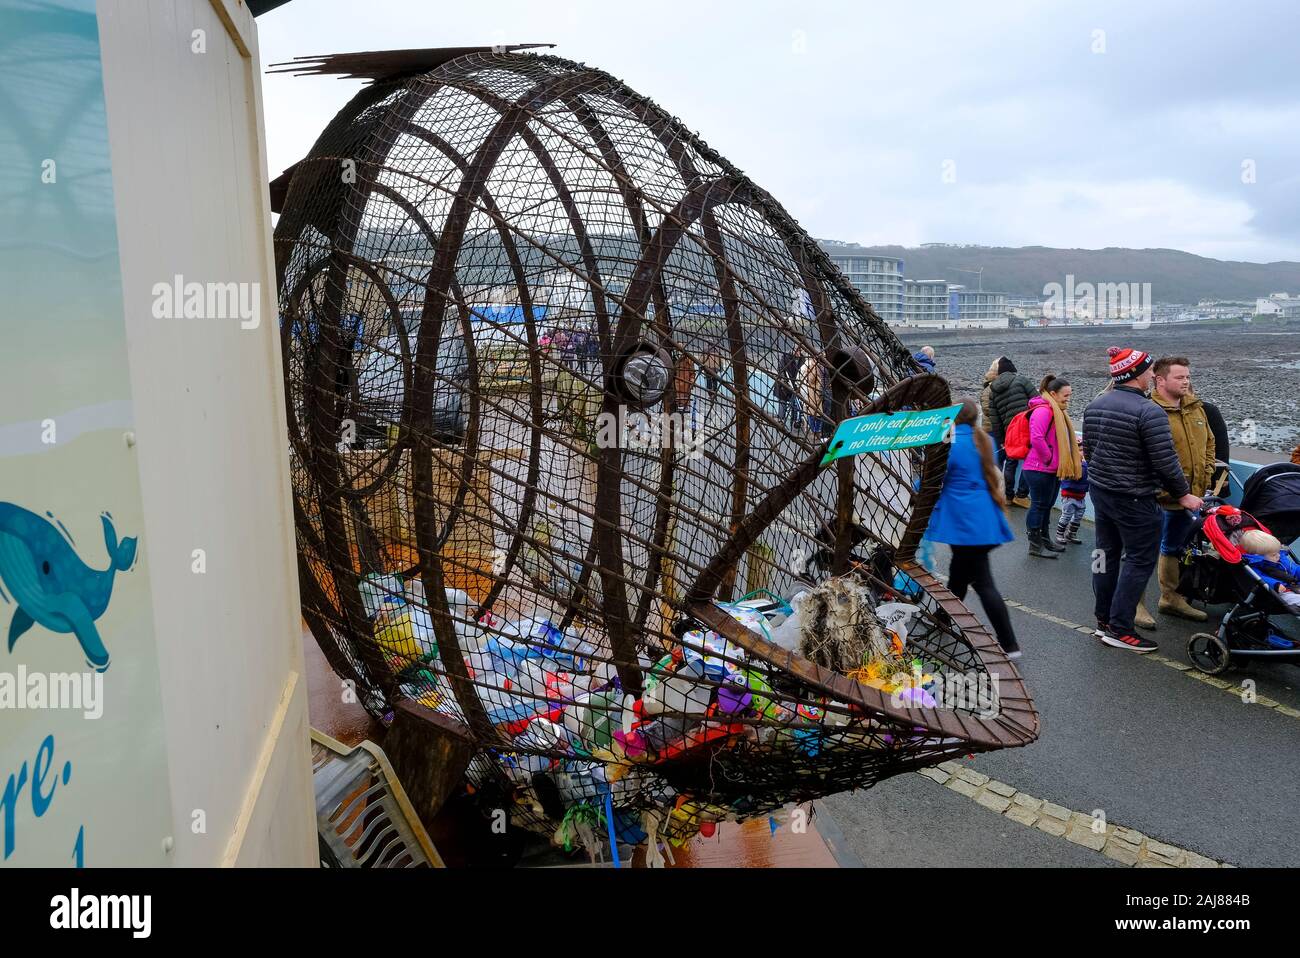 Filup The Fish, created by metal artist Robert Floyd, for plastic waste bottle collection on the promenade at Westward Ho! North Devon, UK Stock Photo